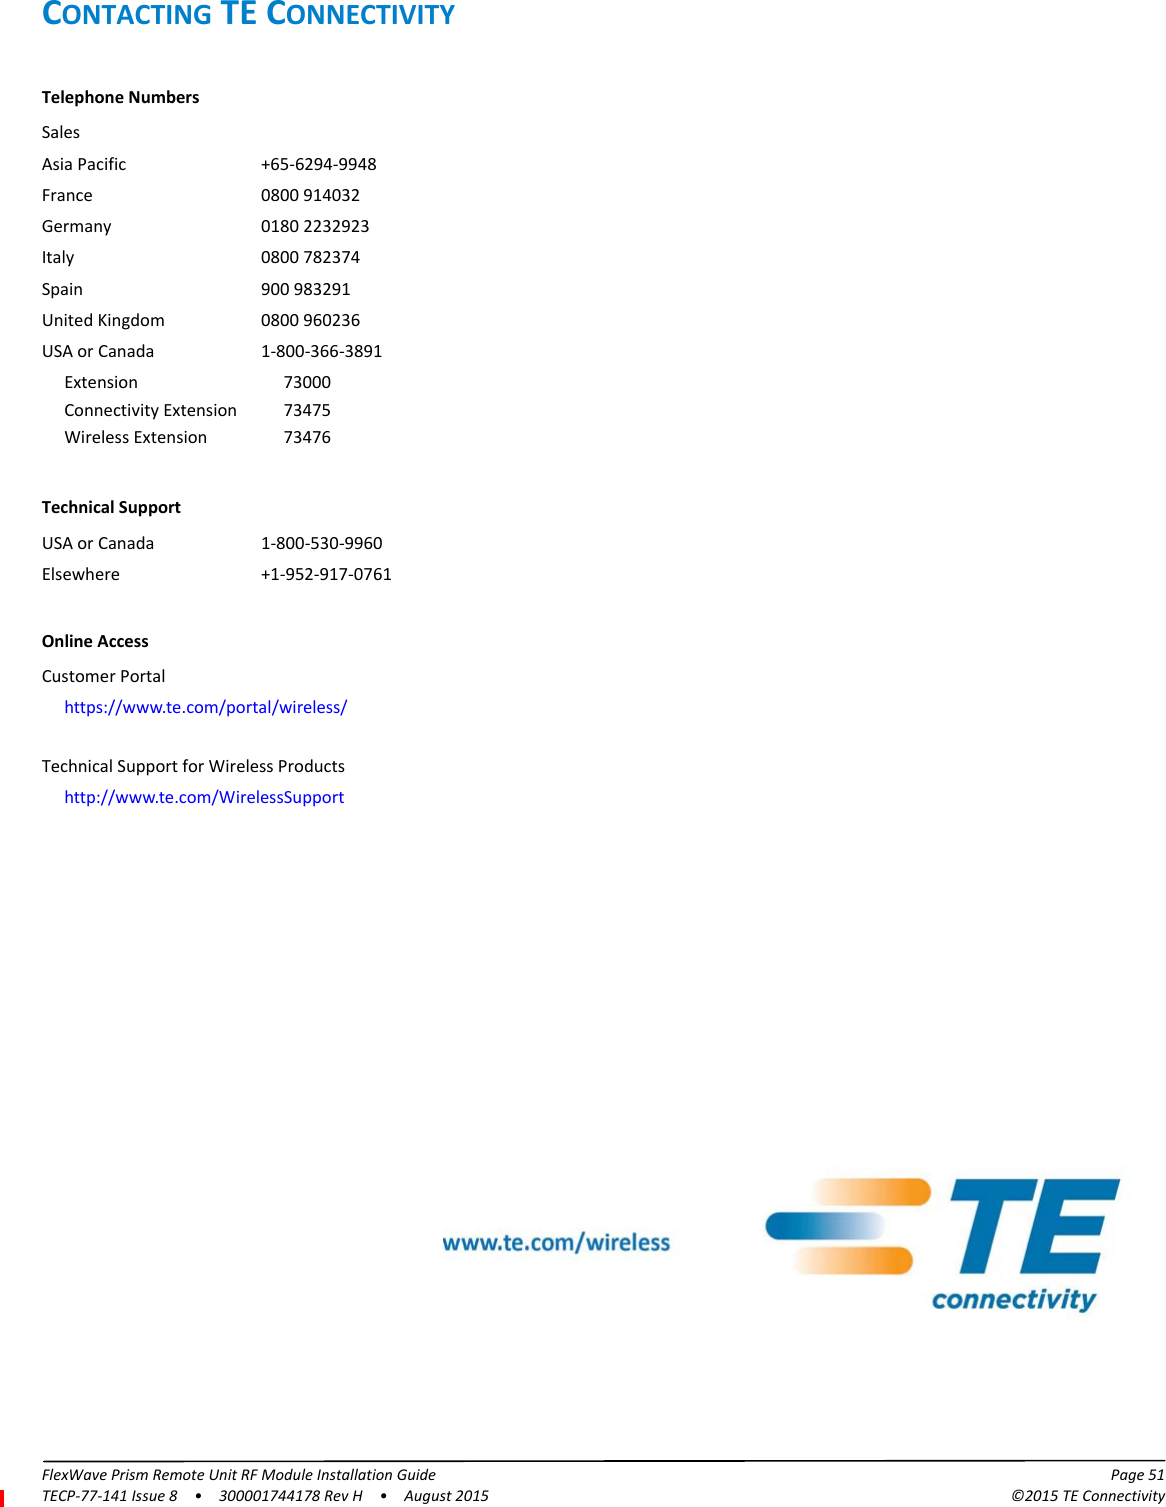 FlexWave Prism Remote Unit RF Module Installation Guide Page 51TECP-77-141 Issue 8  •  300001744178 Rev H  •  August 2015 ©2015 TE ConnectivityCONTACTING TE CONNECTIVITYTelephone NumbersSalesAsia Pacific +65-6294-9948France 0800 914032Germany 0180 2232923Italy 0800 782374Spain 900 983291United Kingdom 0800 960236USA or Canada 1-800-366-3891Extension 73000Connectivity Extension 73475Wireless Extension 73476Technical SupportUSA or Canada 1-800-530-9960Elsewhere +1-952-917-0761Online AccessCustomer Portalhttps://www.te.com/portal/wireless/Technical Support for Wireless Productshttp://www.te.com/WirelessSupport 